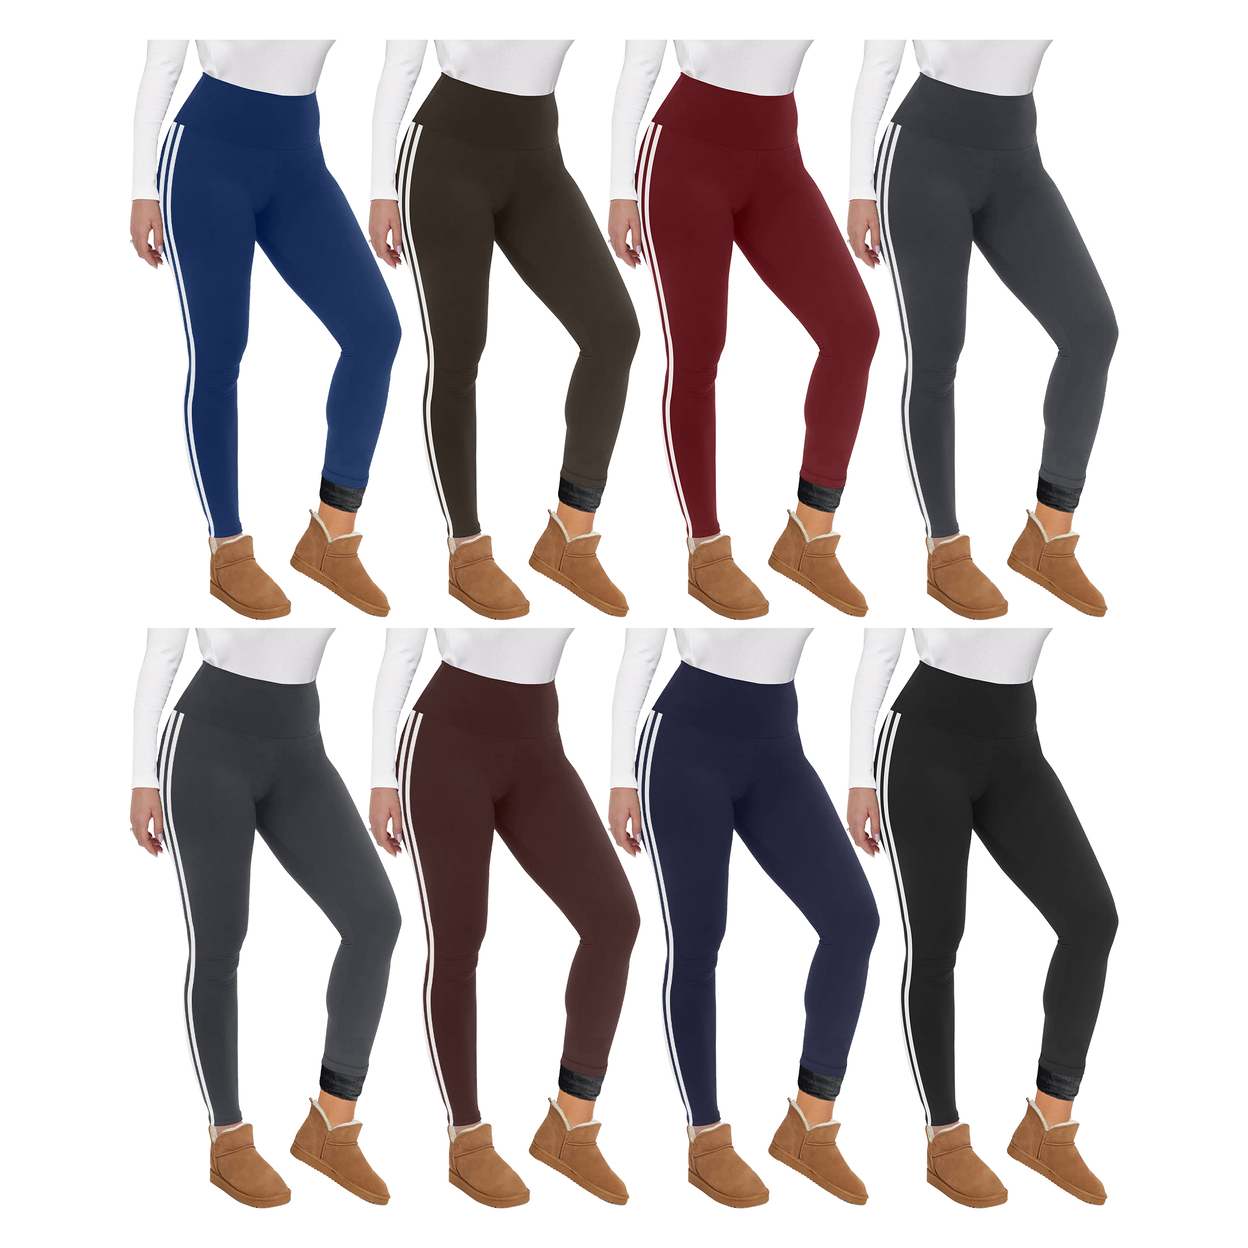 4-Pack: Women's Ultra Soft Winter Warm Cozy Striped Fur Lined Yoga Leggings - Assorted, Large